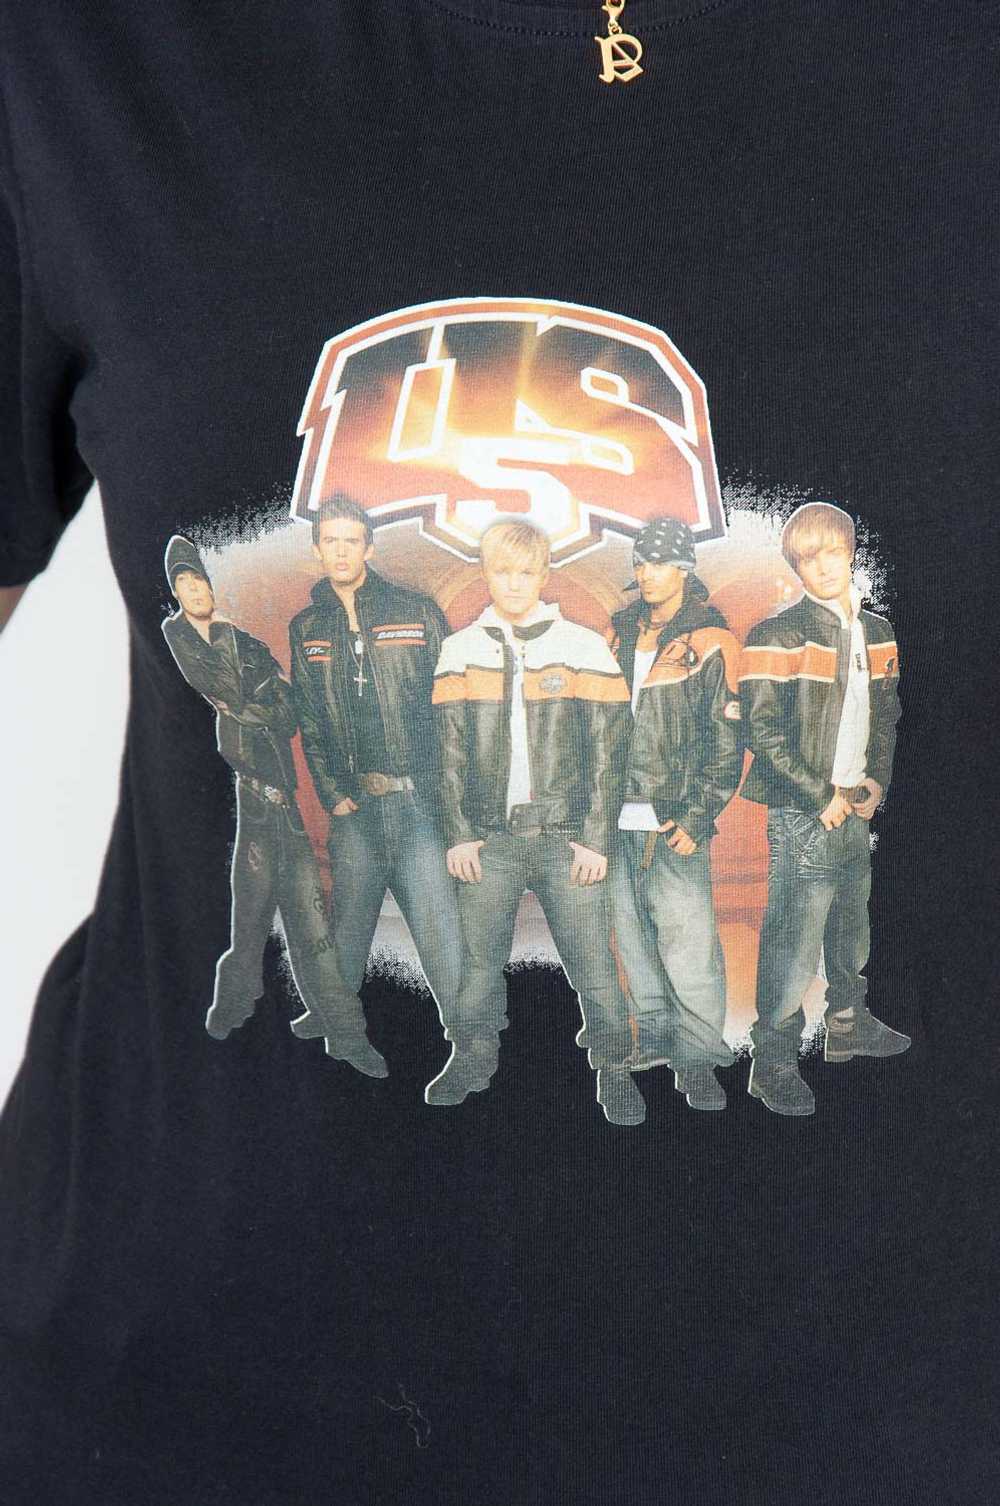 Us 5 band shirt Black With Here We Go Tour 2006 P… - image 4